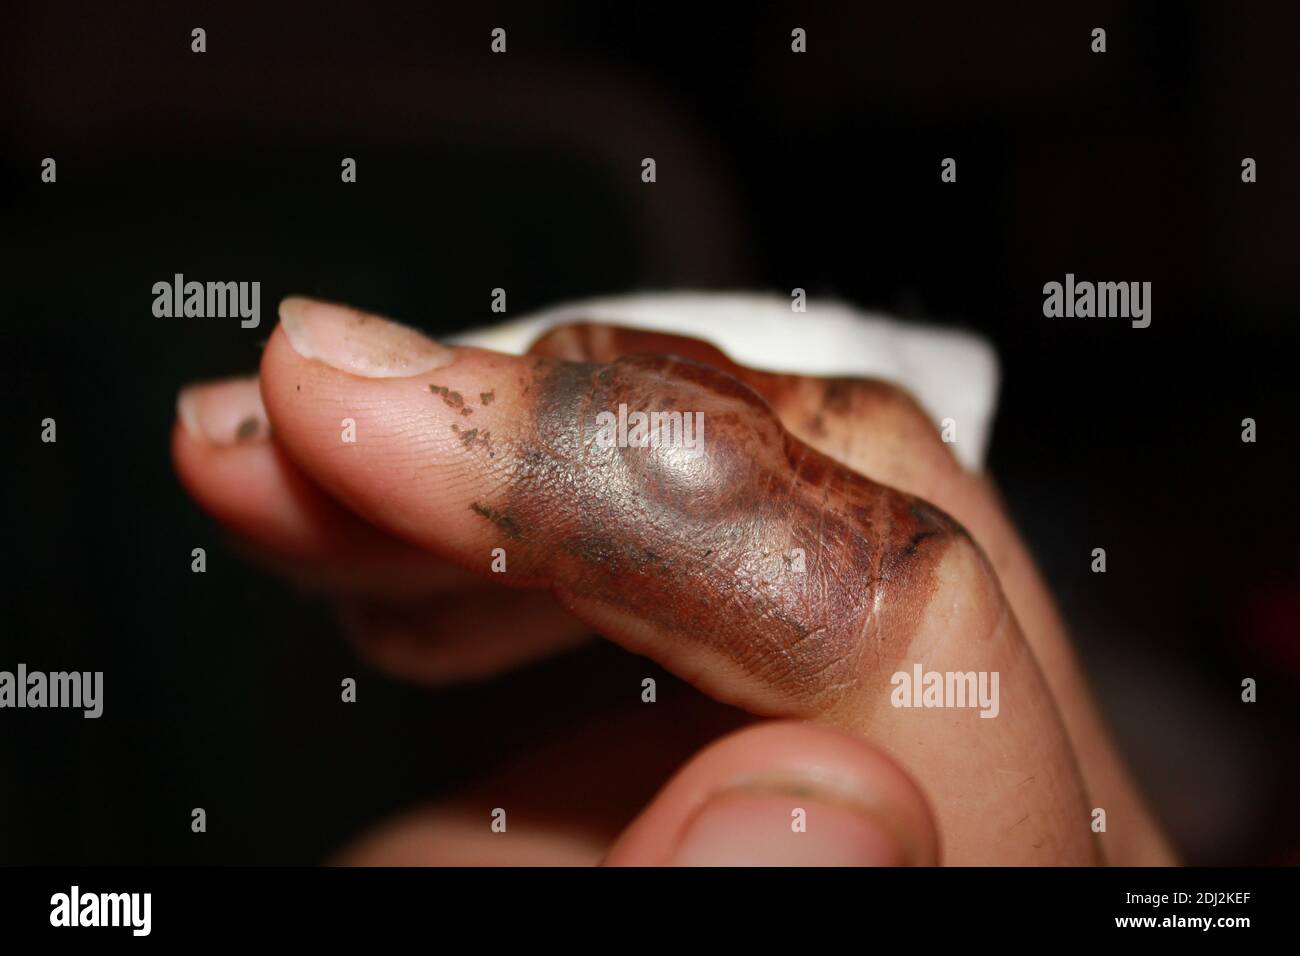 burned fingers with big blisters Stock Photo